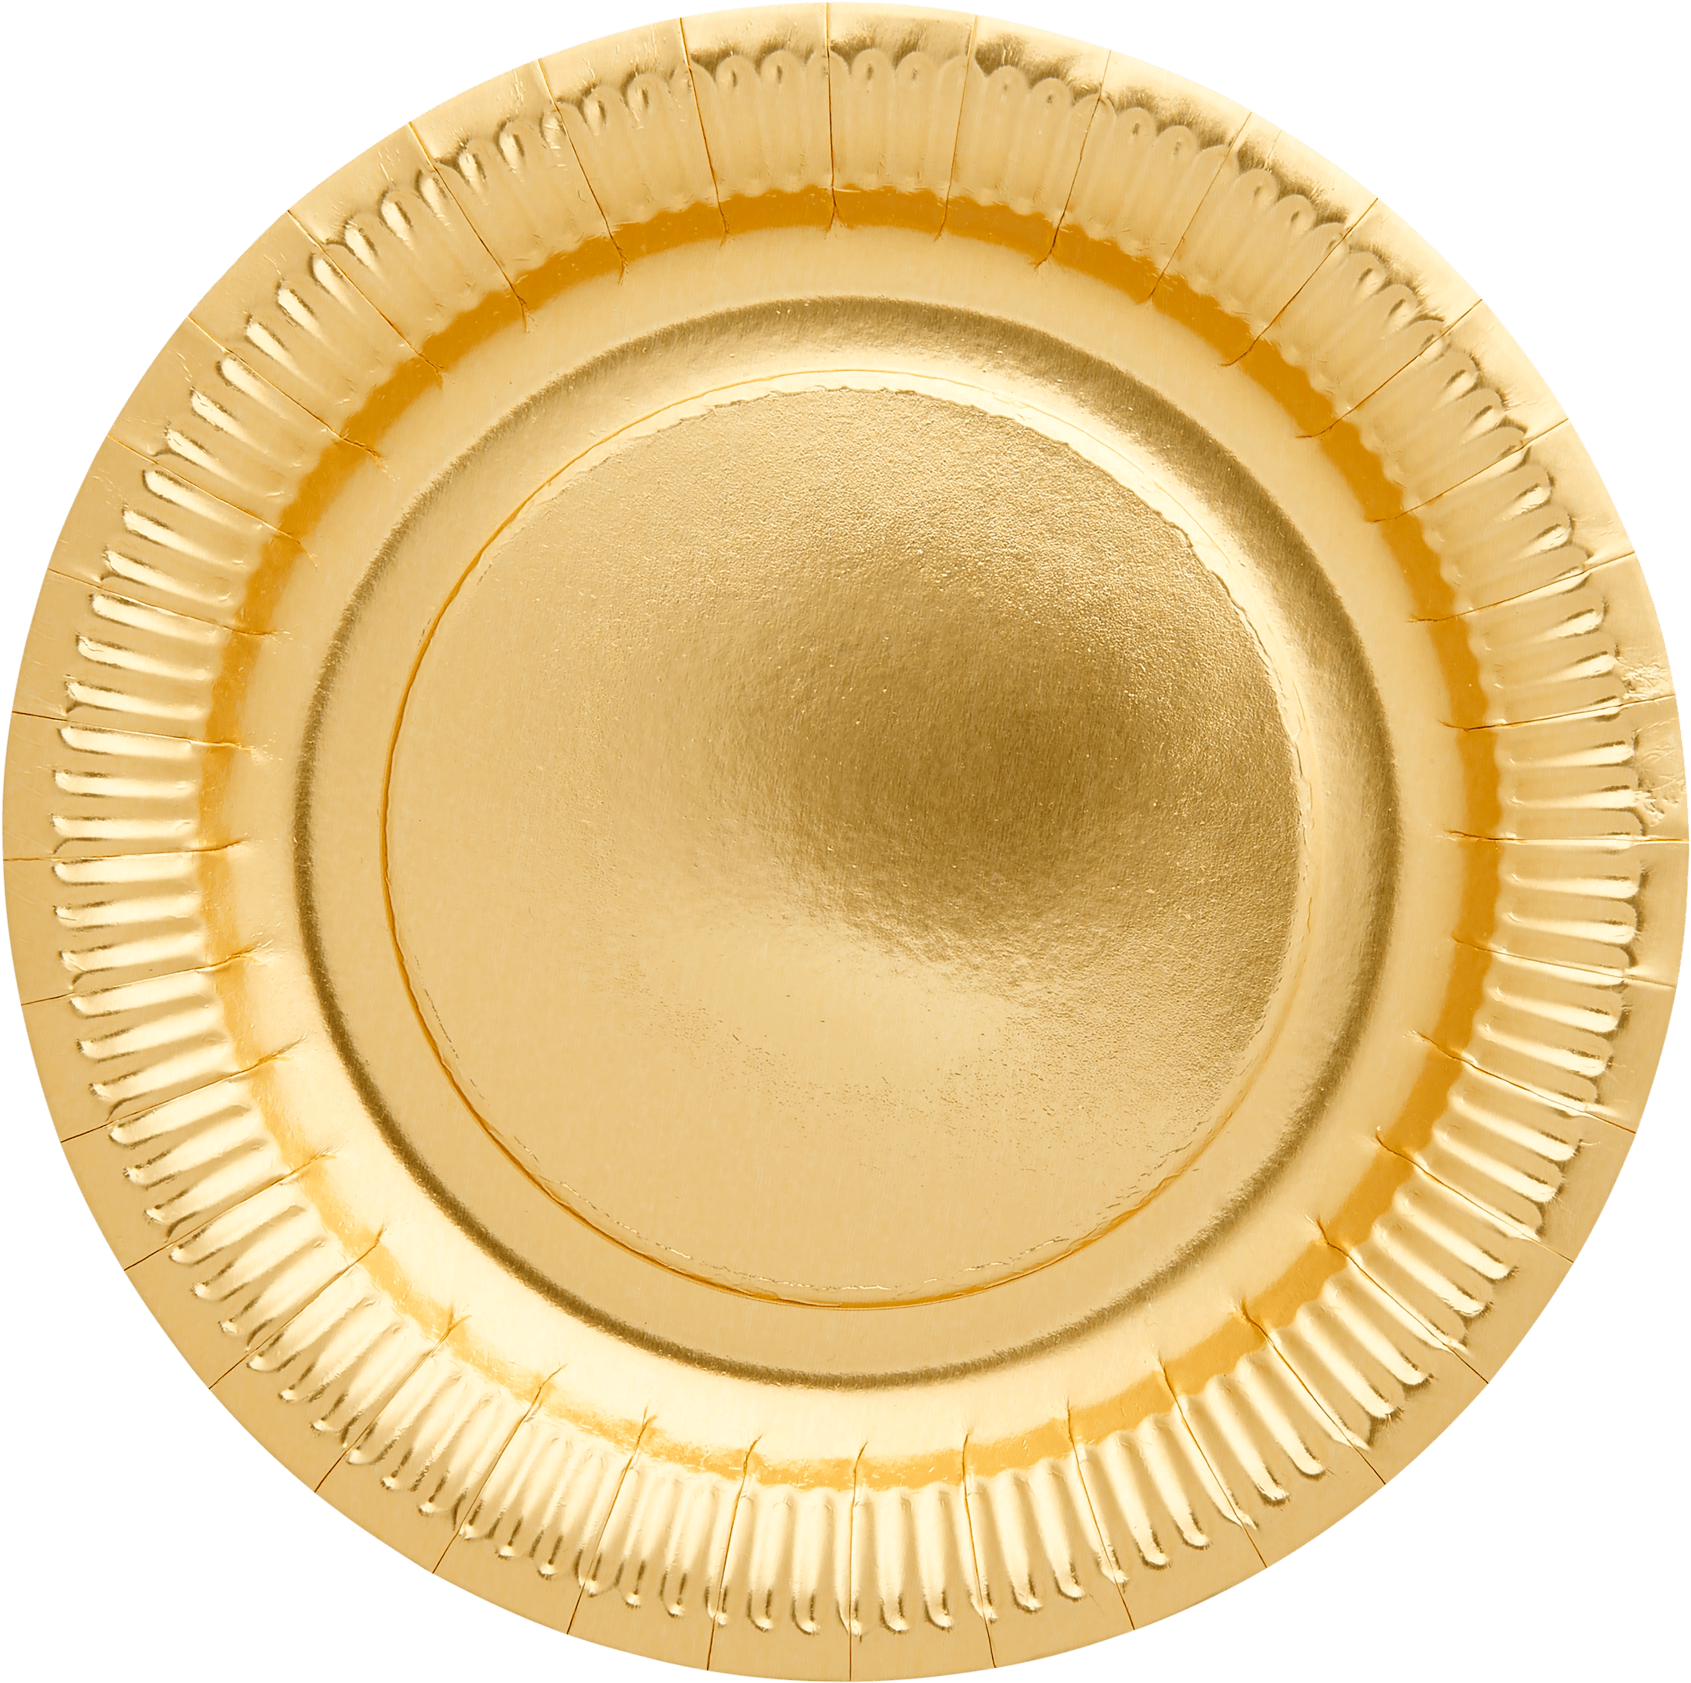 A Gold Plate With A Black Background